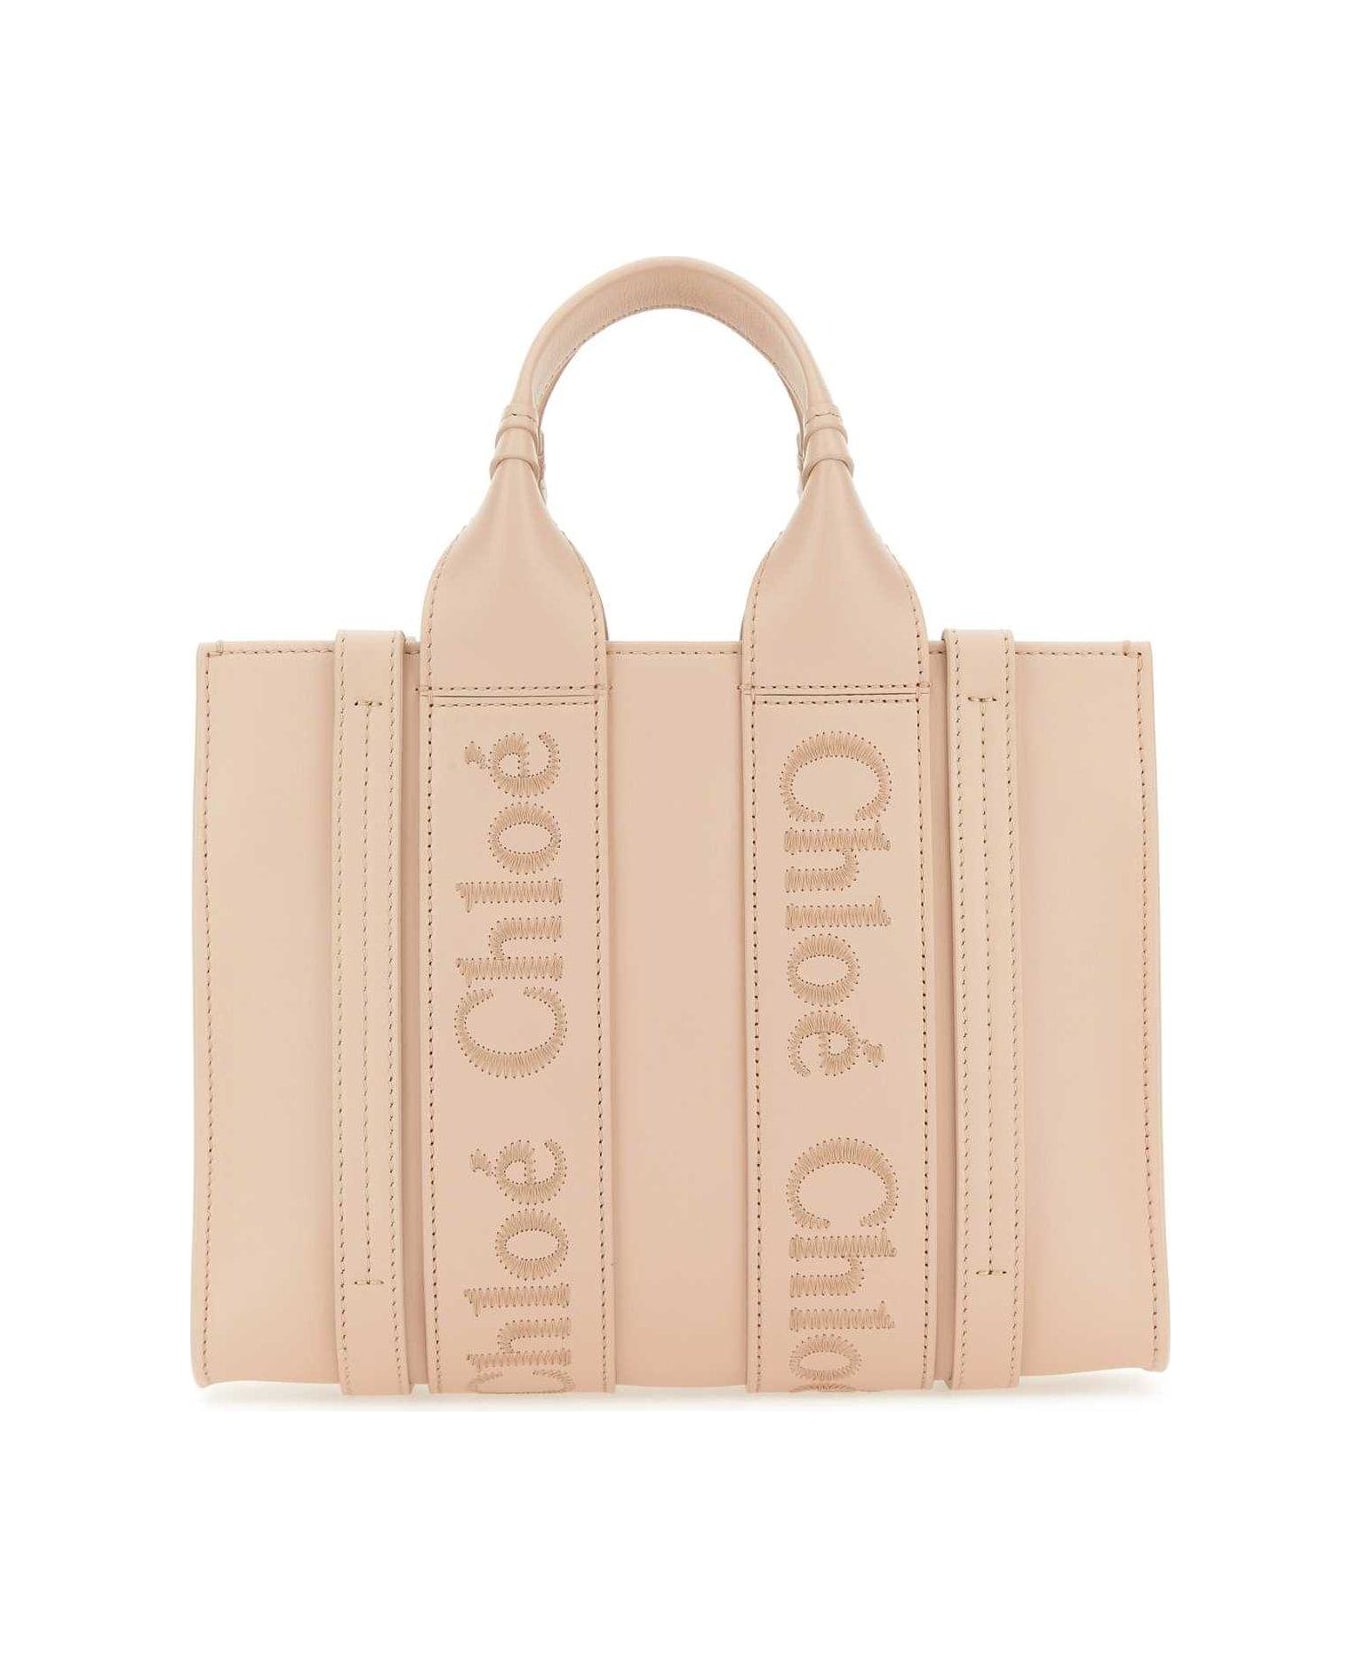 Chloé Woody Small Tote Bag - Cement pink